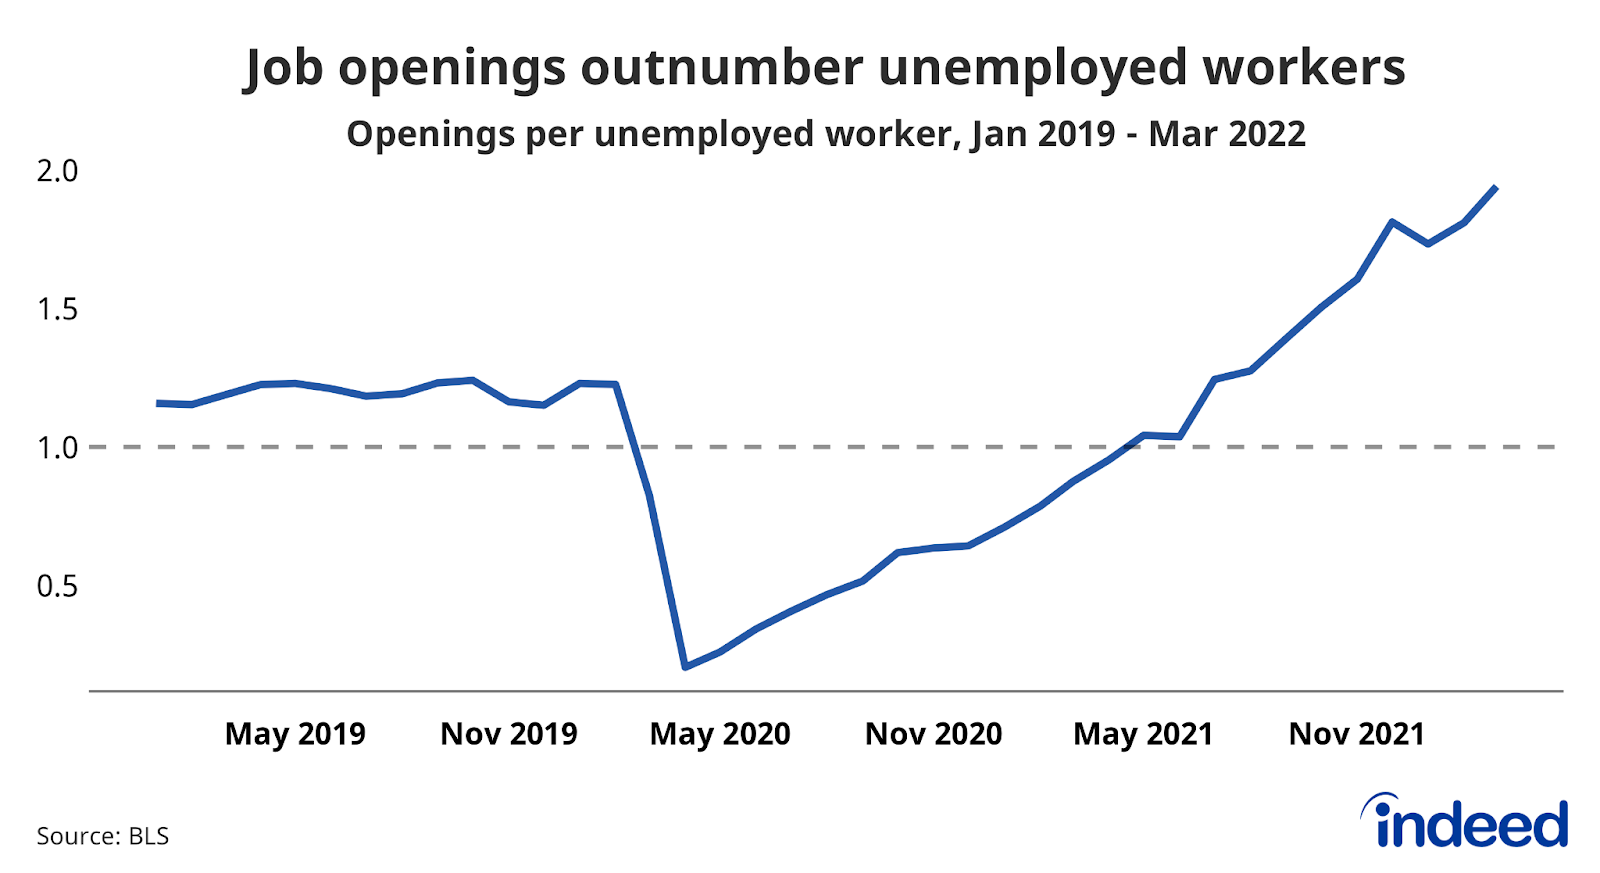 Line chart showing the openings per unemployeed worker, January 2019 to March 2022. The chart shows that now job openings are outnumbering unemployed workers. 